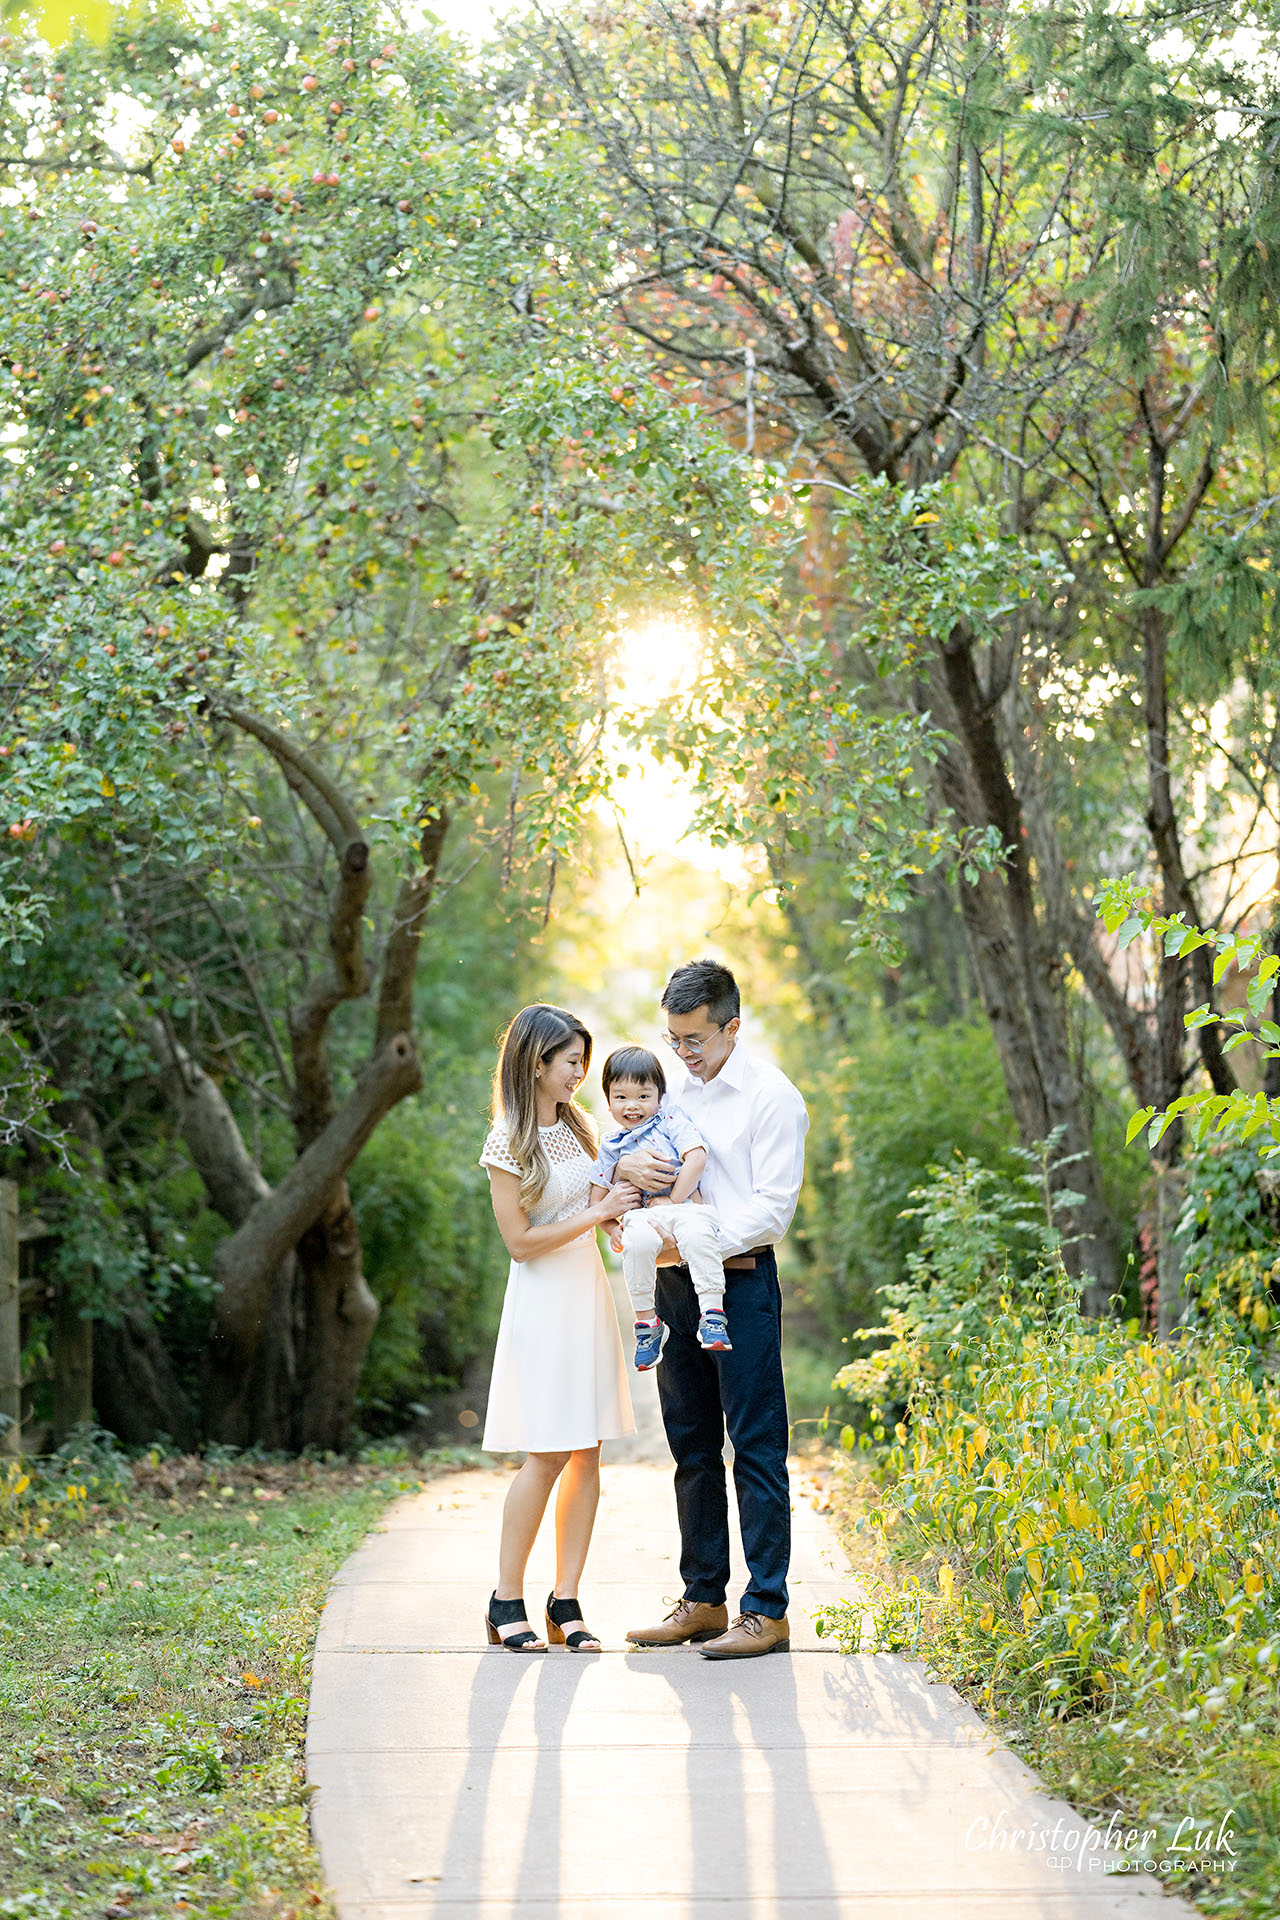 Christopher Luk Markham Family Photographer Photojournalistic Candid Natural Organic Husband Wife Mom Dad Son Child Family Holding Hands Hug Laugh Portrait